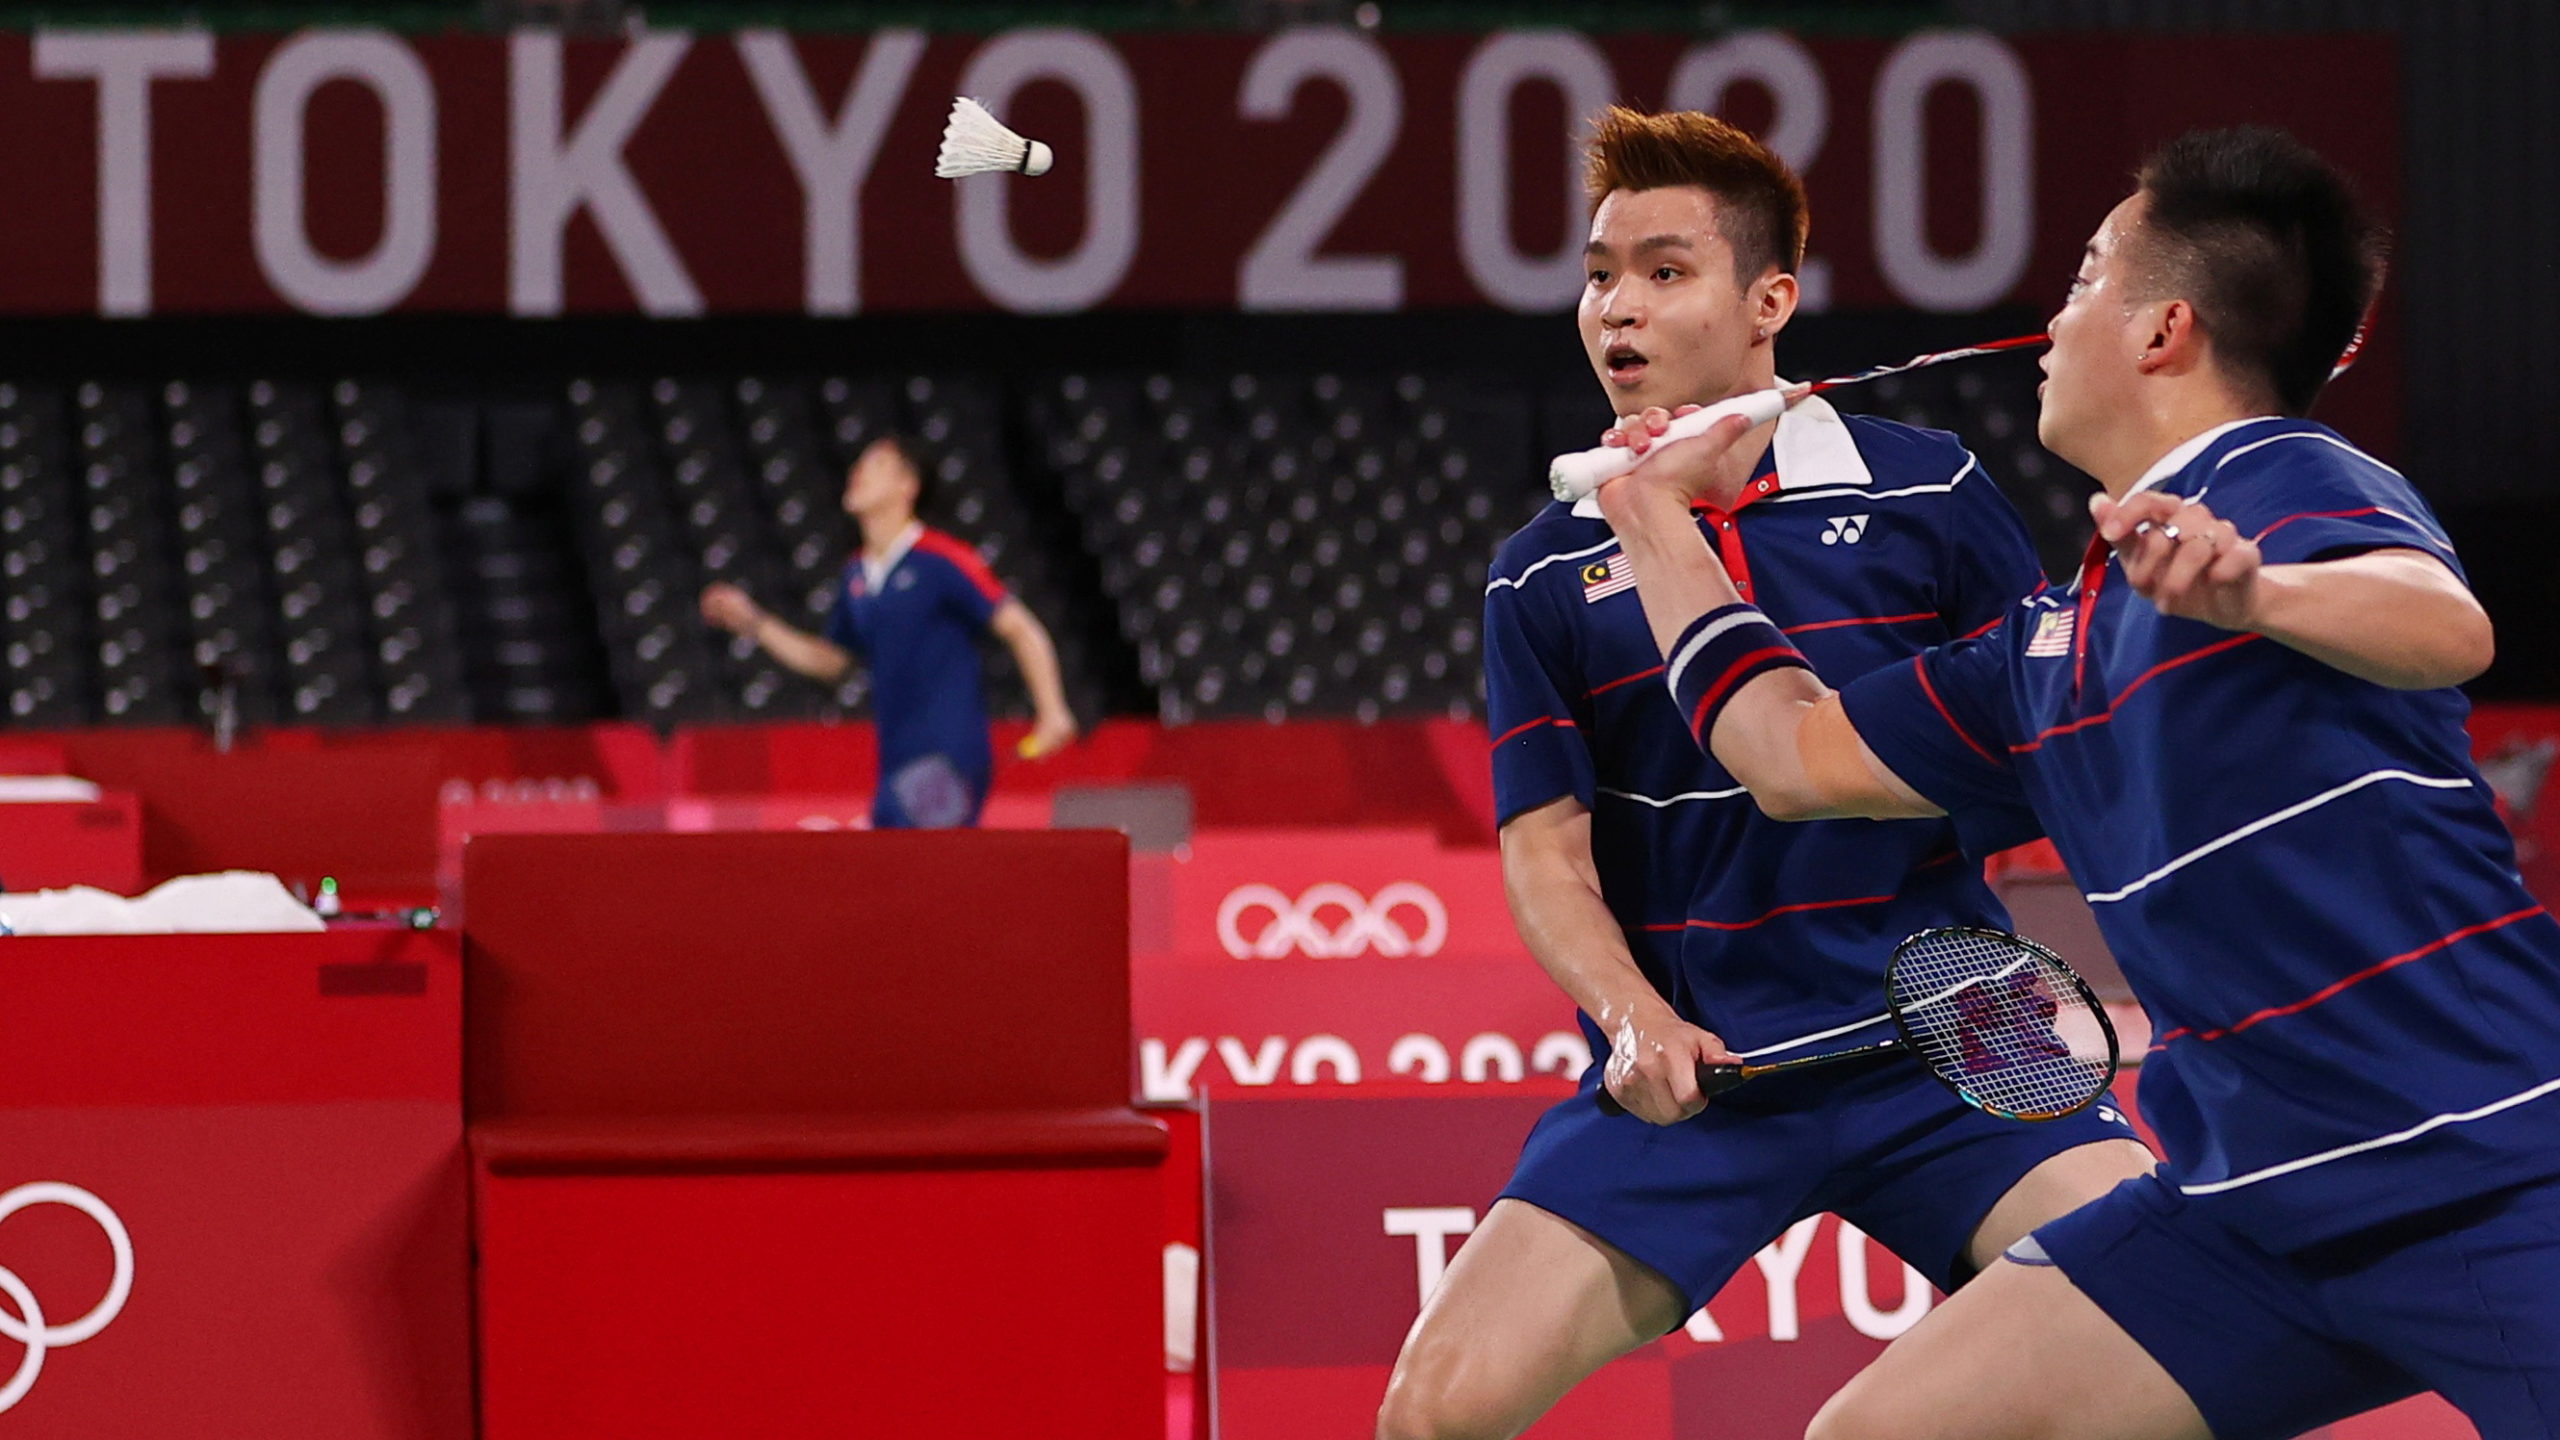 Tokyo 2020 Olympics - Badminton - Men's Doubles - Quarterfinal - MFS - Musashino Forest Sport Plaza, Tokyo, Japan – July 29, 2021. Aaron Chia of Malaysia in action as Soh Wooi Yik of Malaysia looks on during the match against Marcus Fernaldi Gideon of Indonesia and Kevin Sanjaya Sukamuljo of Indonesia. 